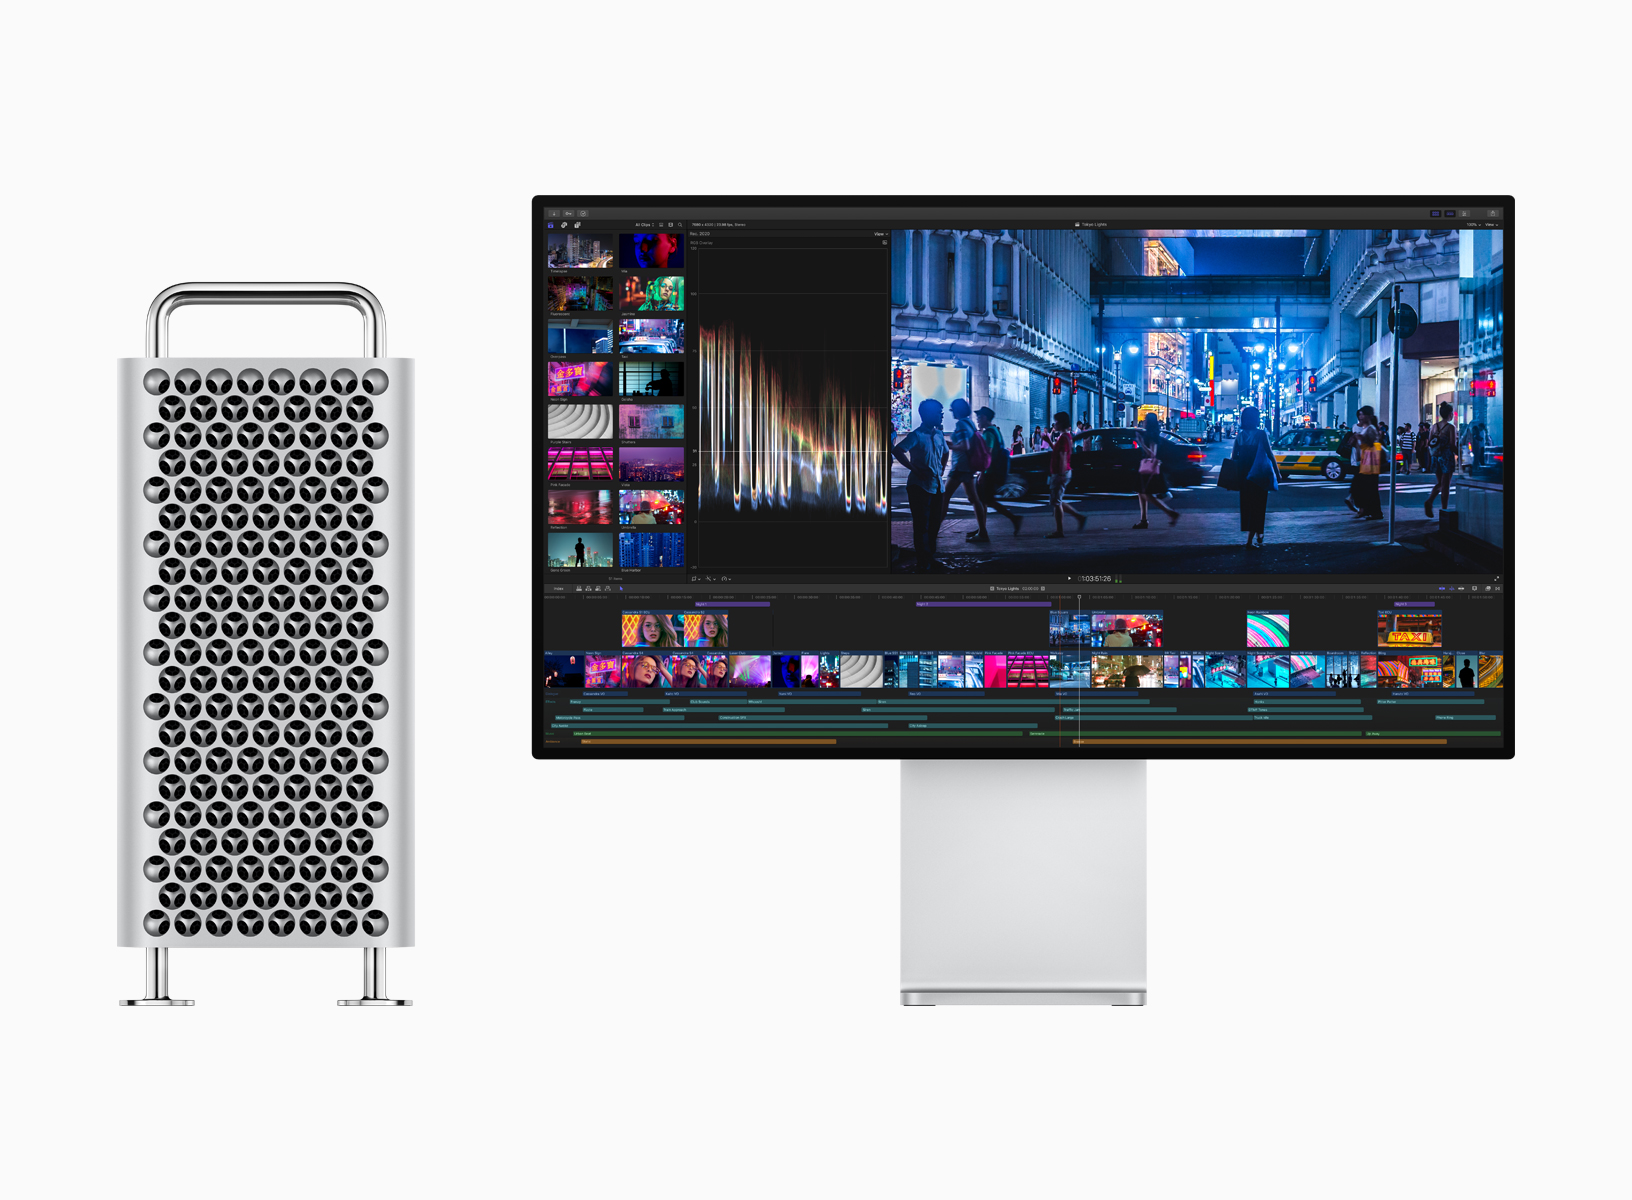 Redesigned Mac Pro (left) and Pro Display XDR